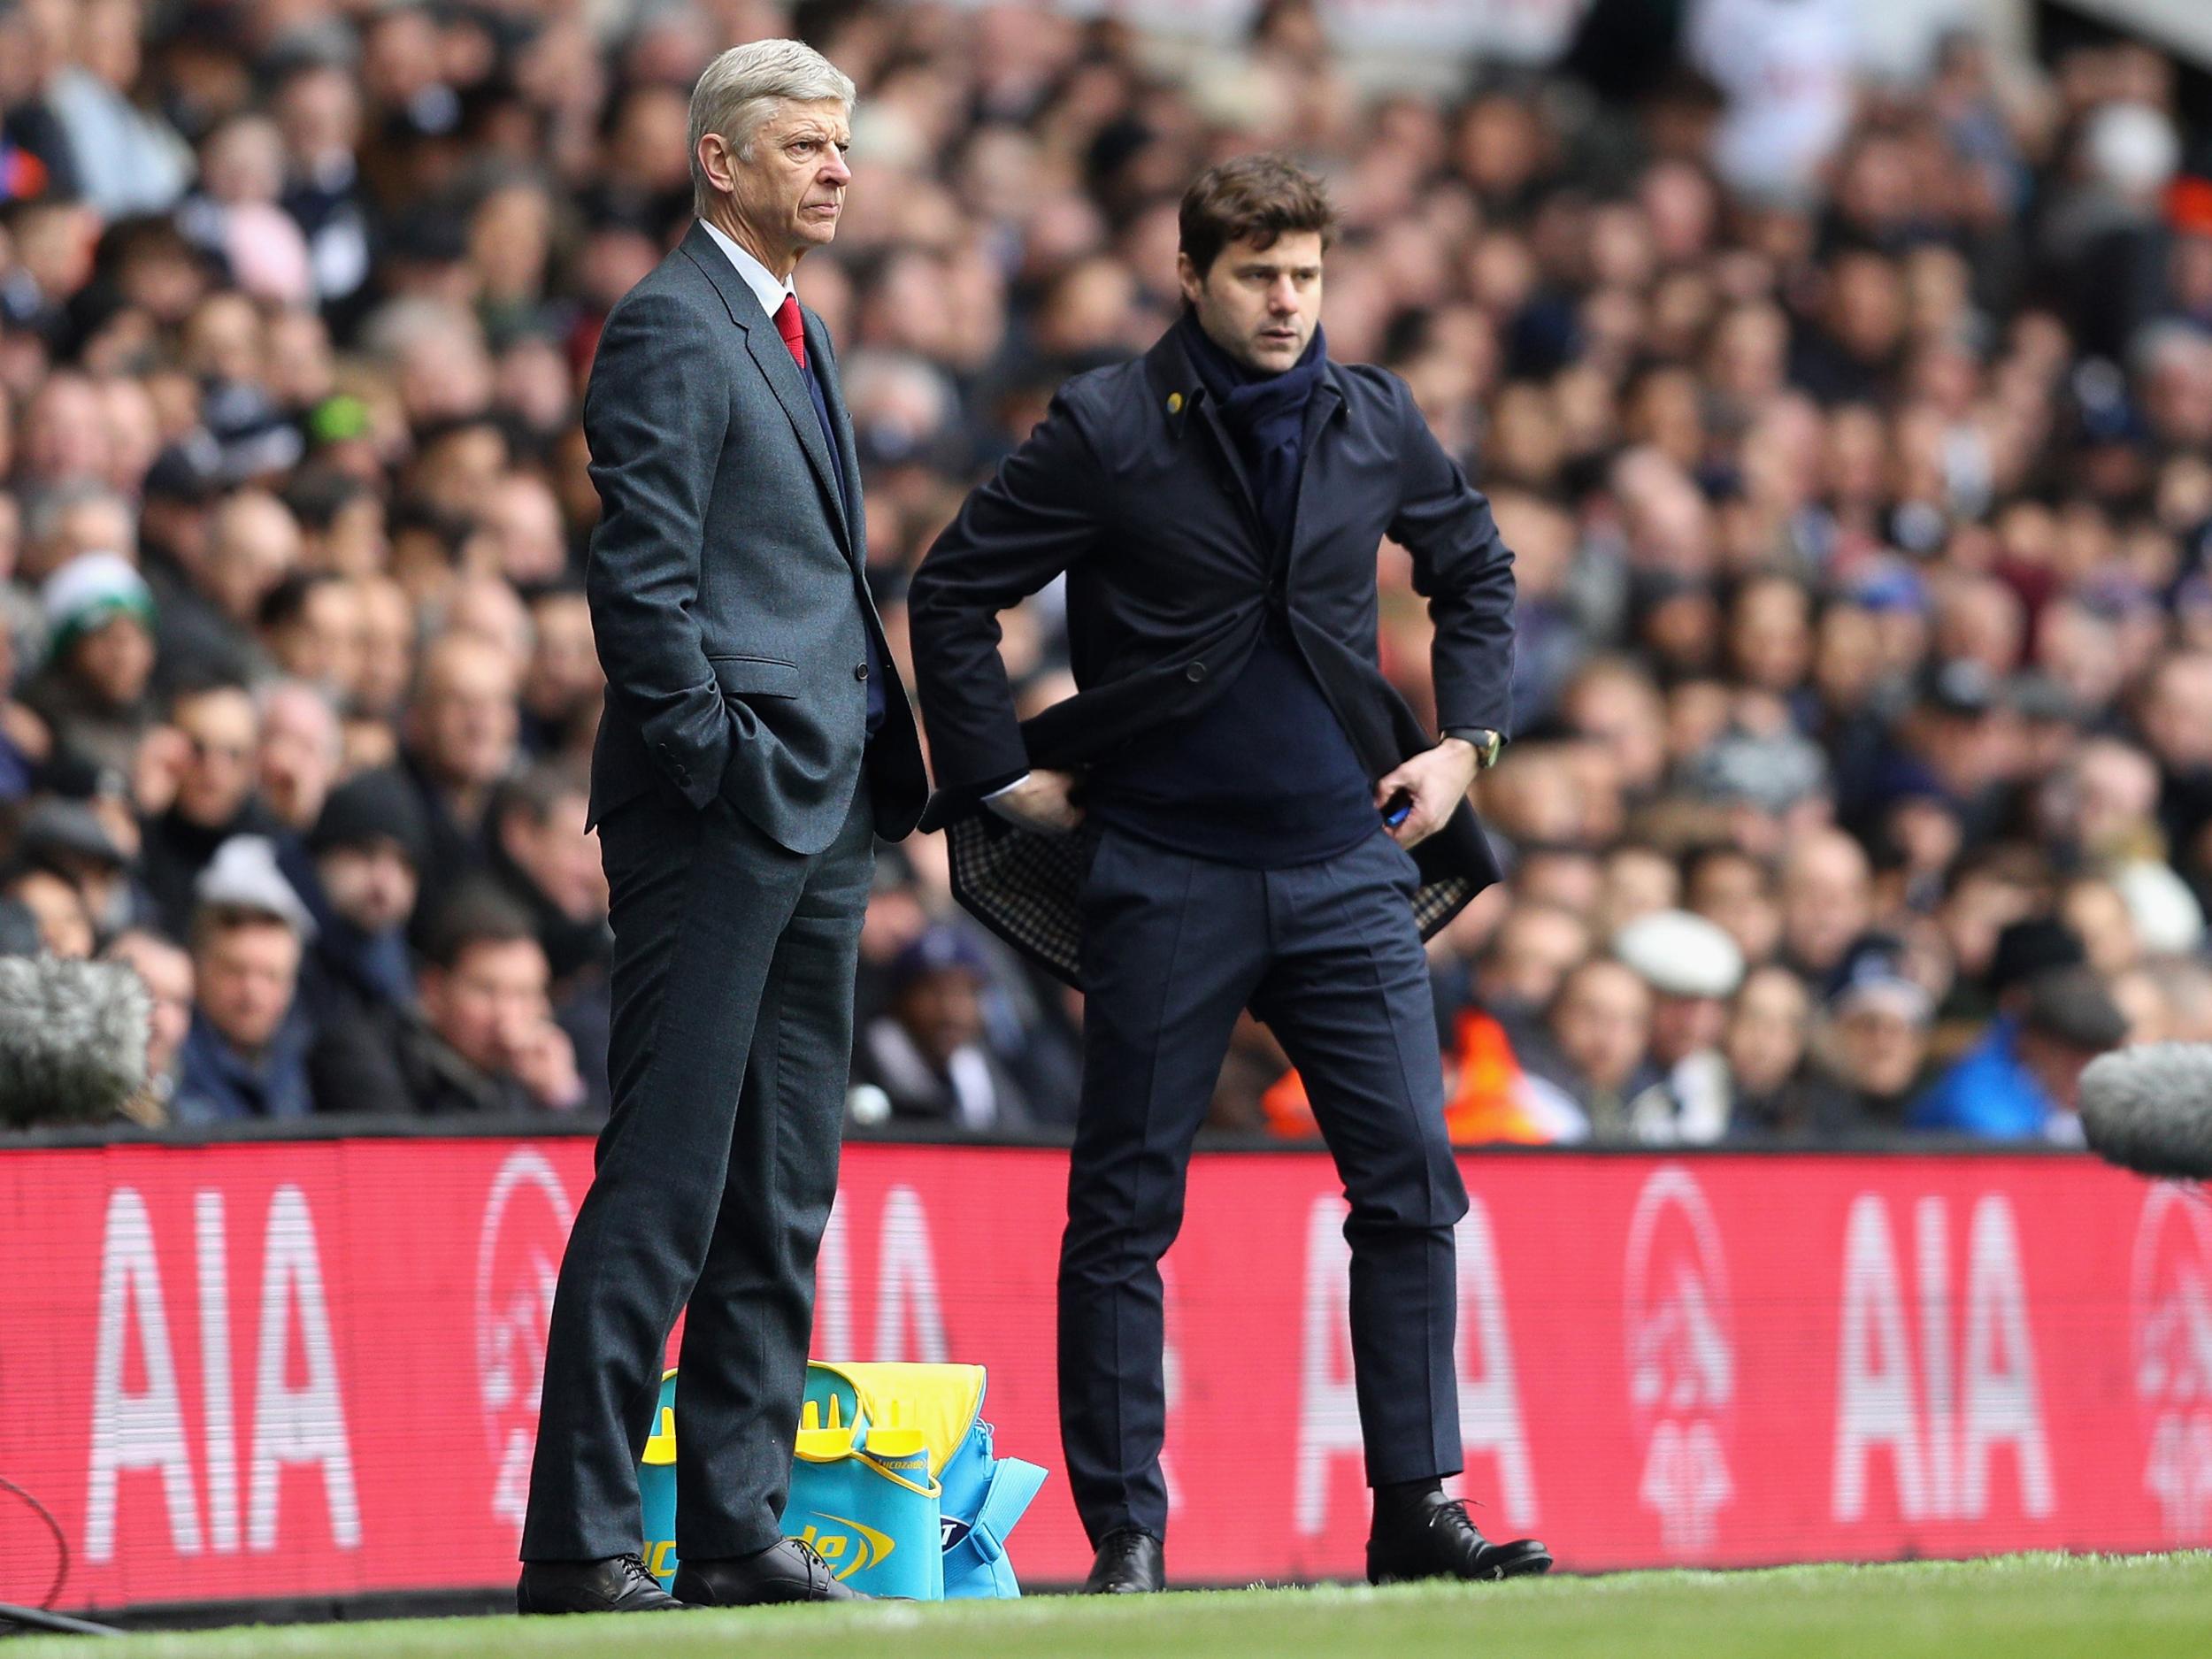 Pochettino's respect of Wenger in comparison to his fiery comments about Guardiola shows how he really rates Arsenal